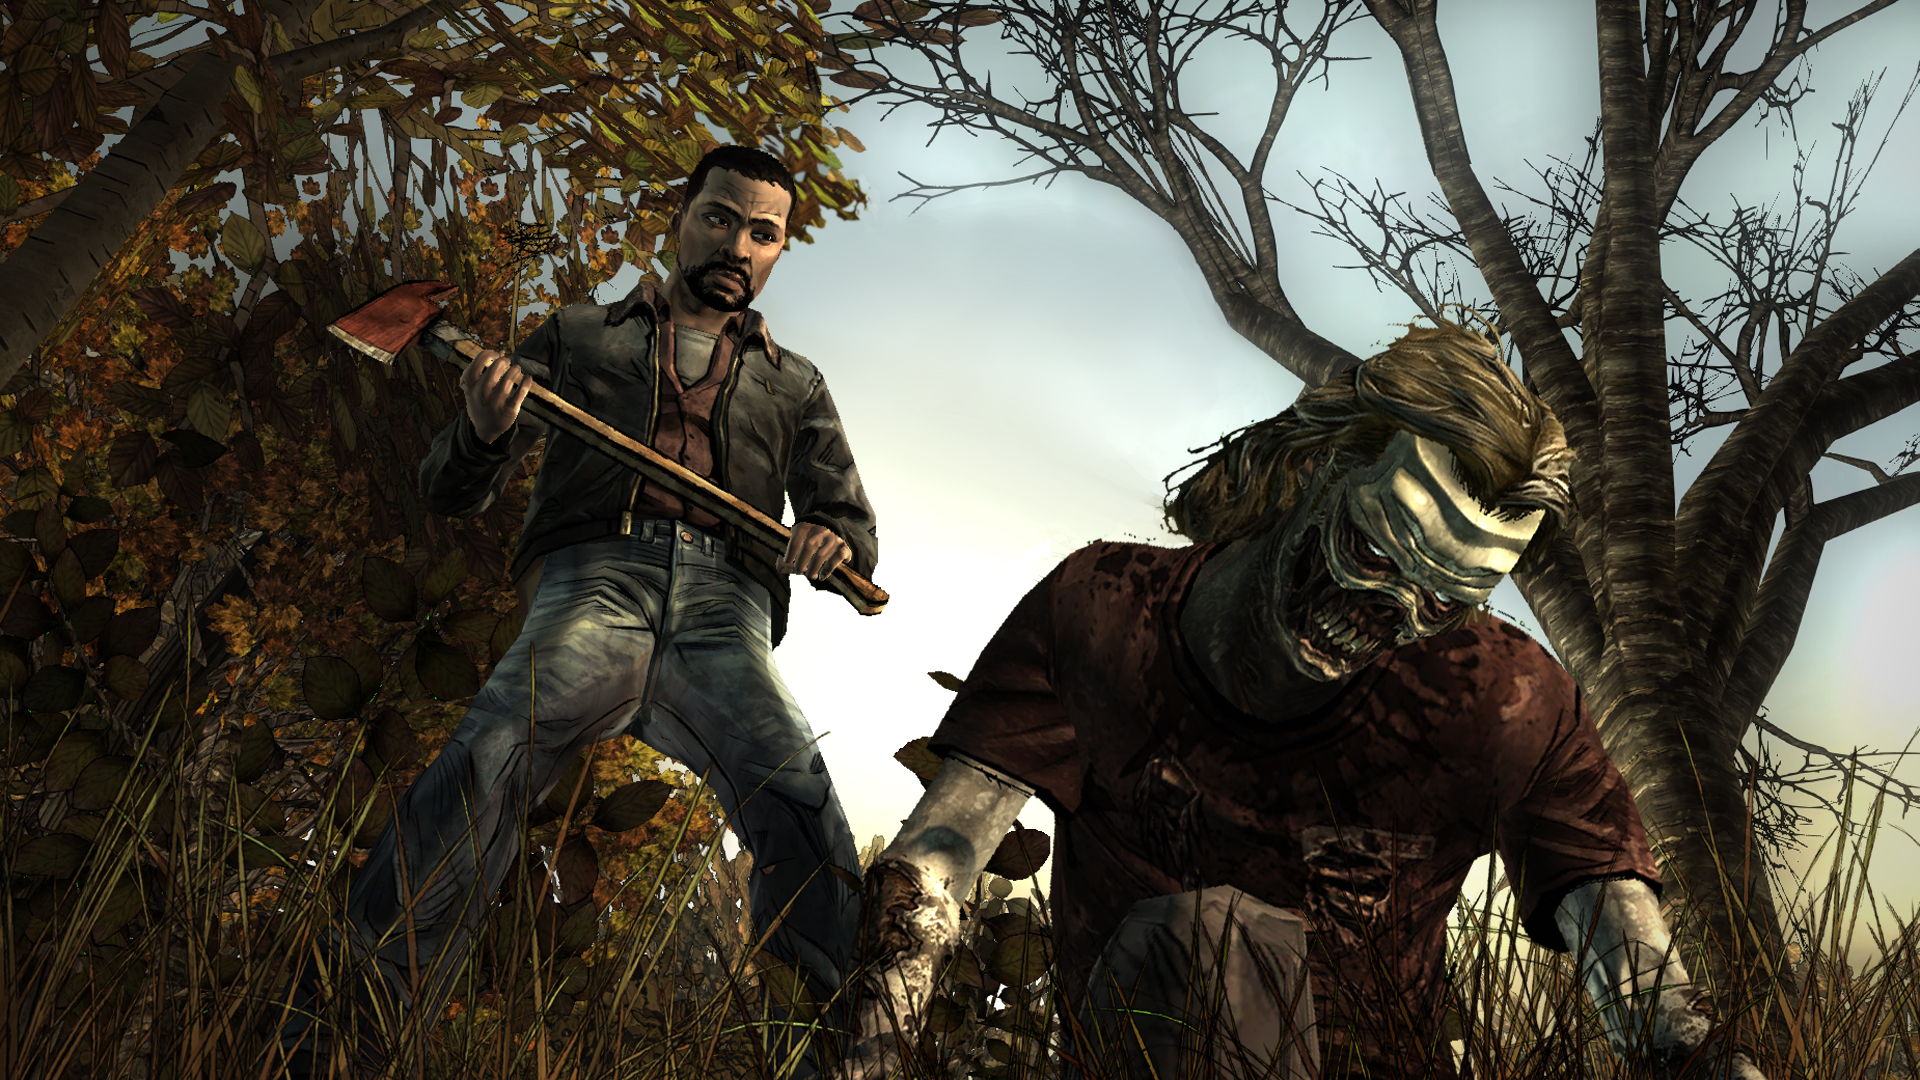 Episode Four of The Walking Dead releases this week